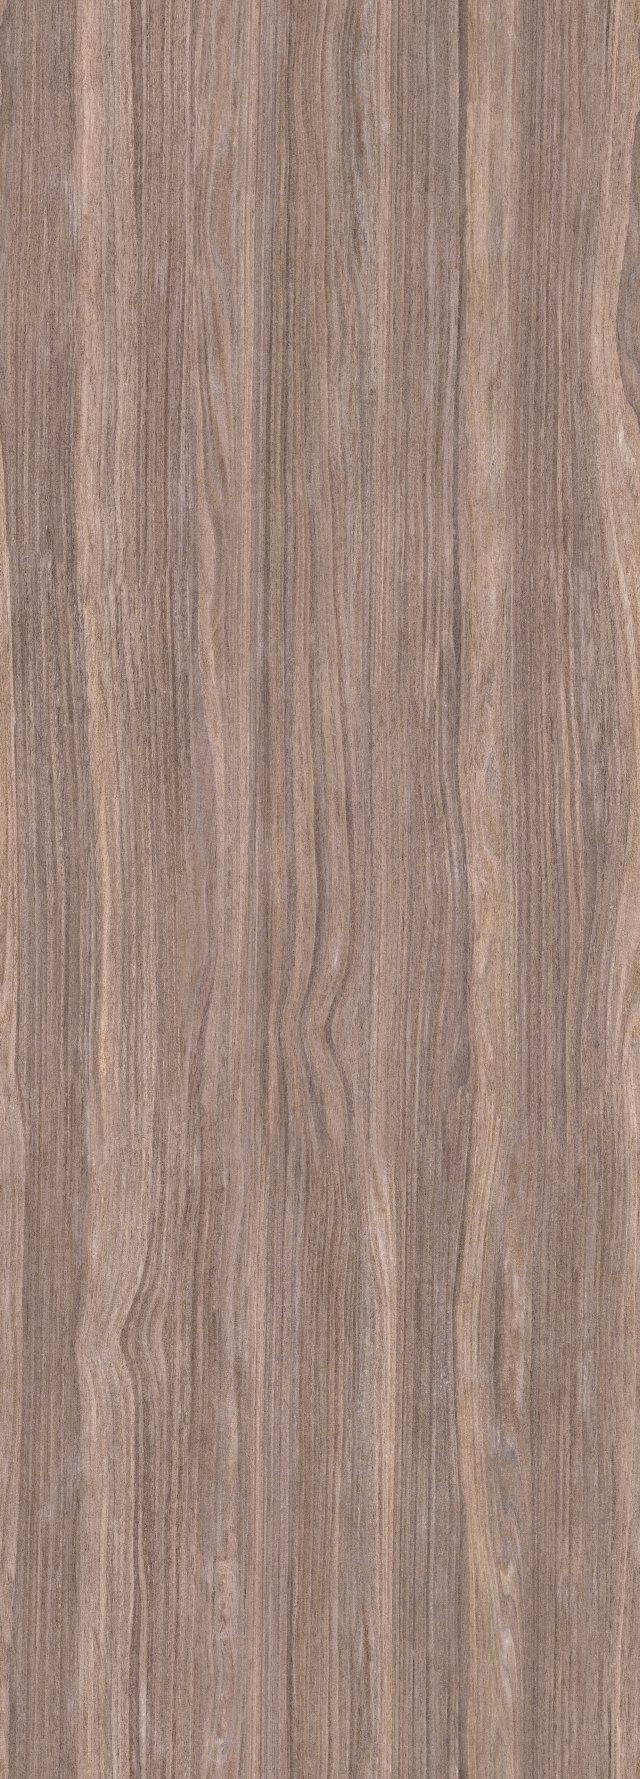 27 high resolution 3k architectural fine wood seamless textures CG Textures  in Wood 3DExport